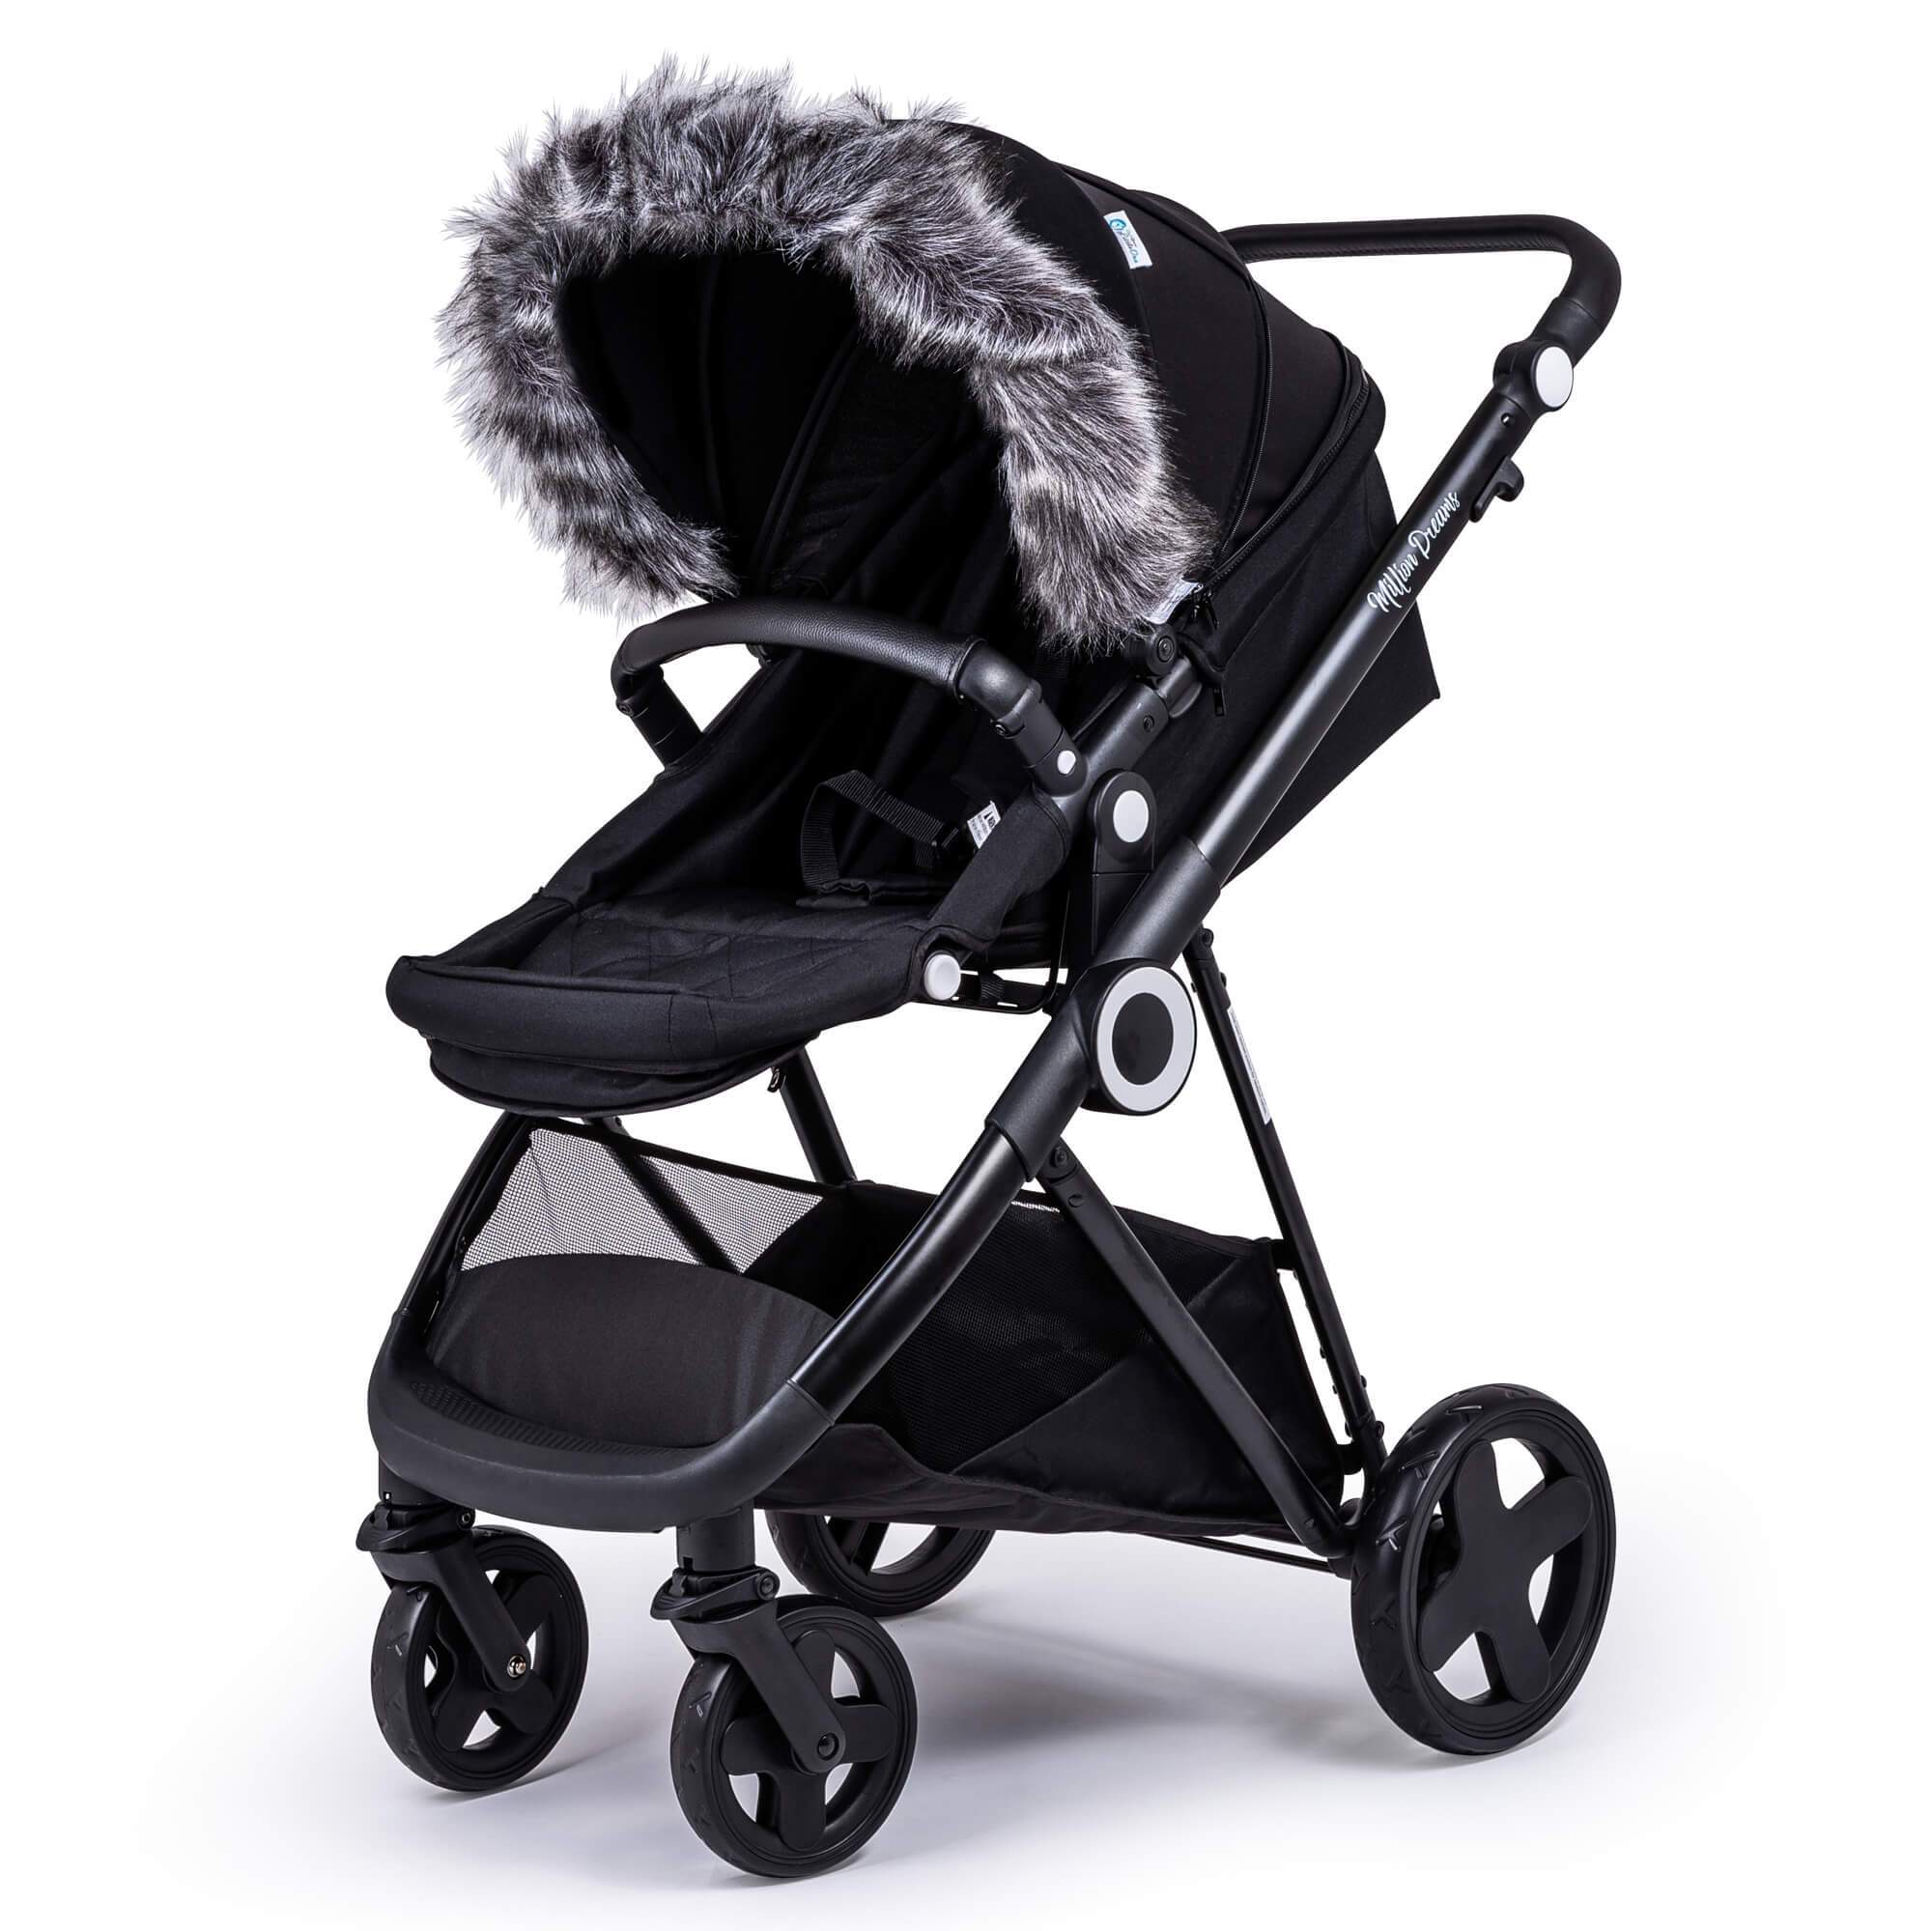 Pram Fur Hood Trim Attachment for Pushchair Compatible with Quinny - Dark Grey / Fits All Models | For Your Little One